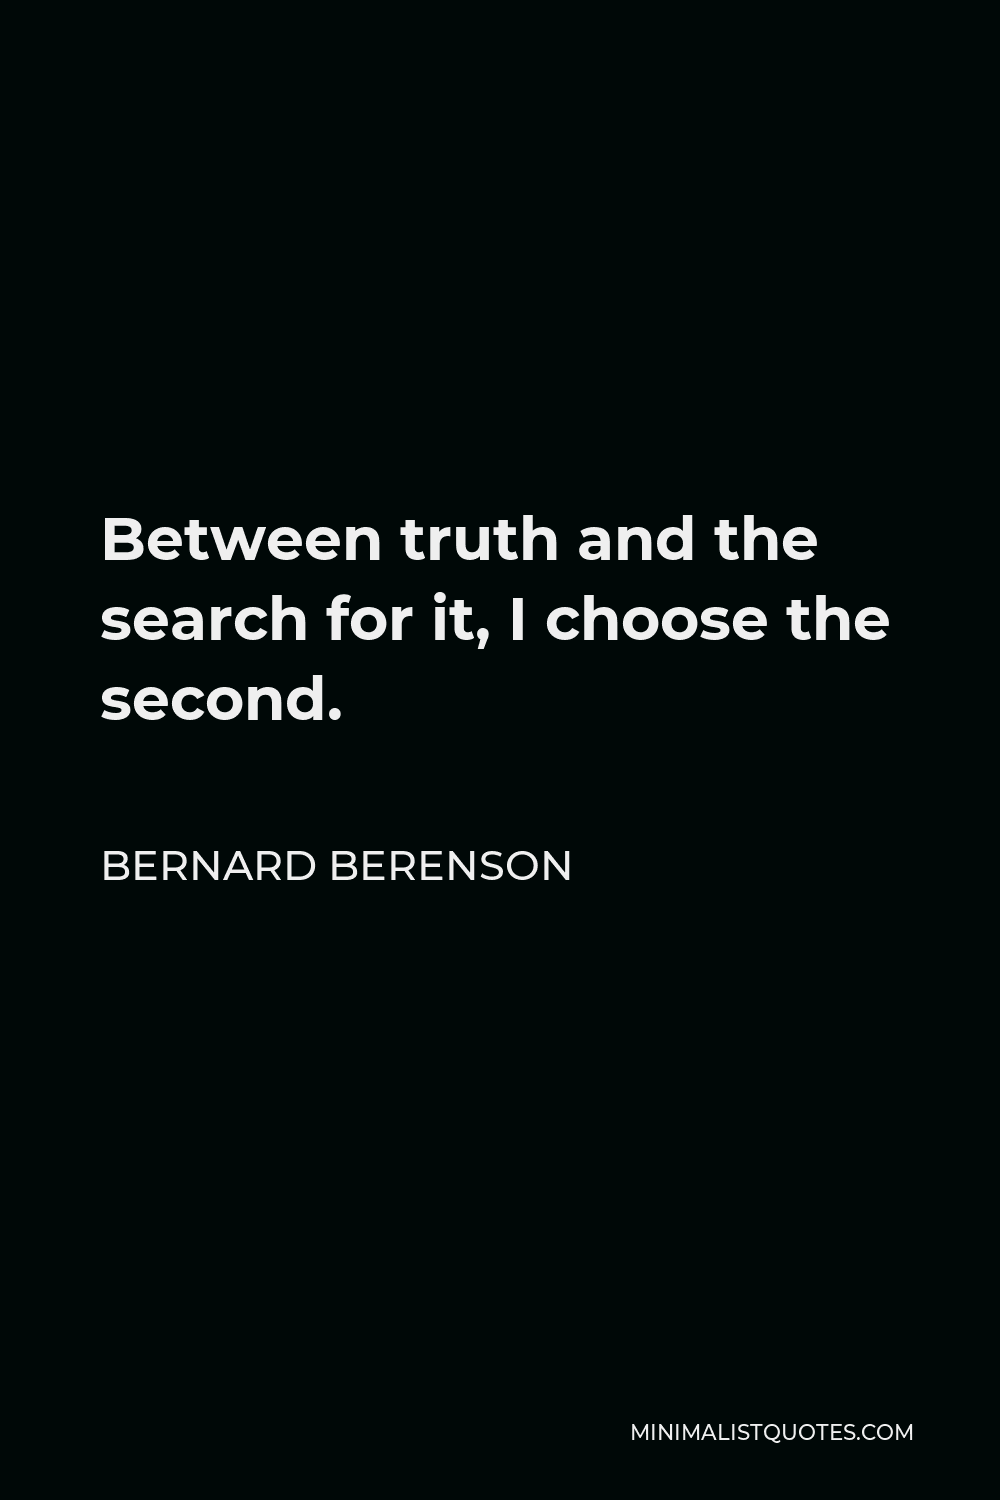 Bernard Berenson Quote - Between truth and the search for it, I choose the second.